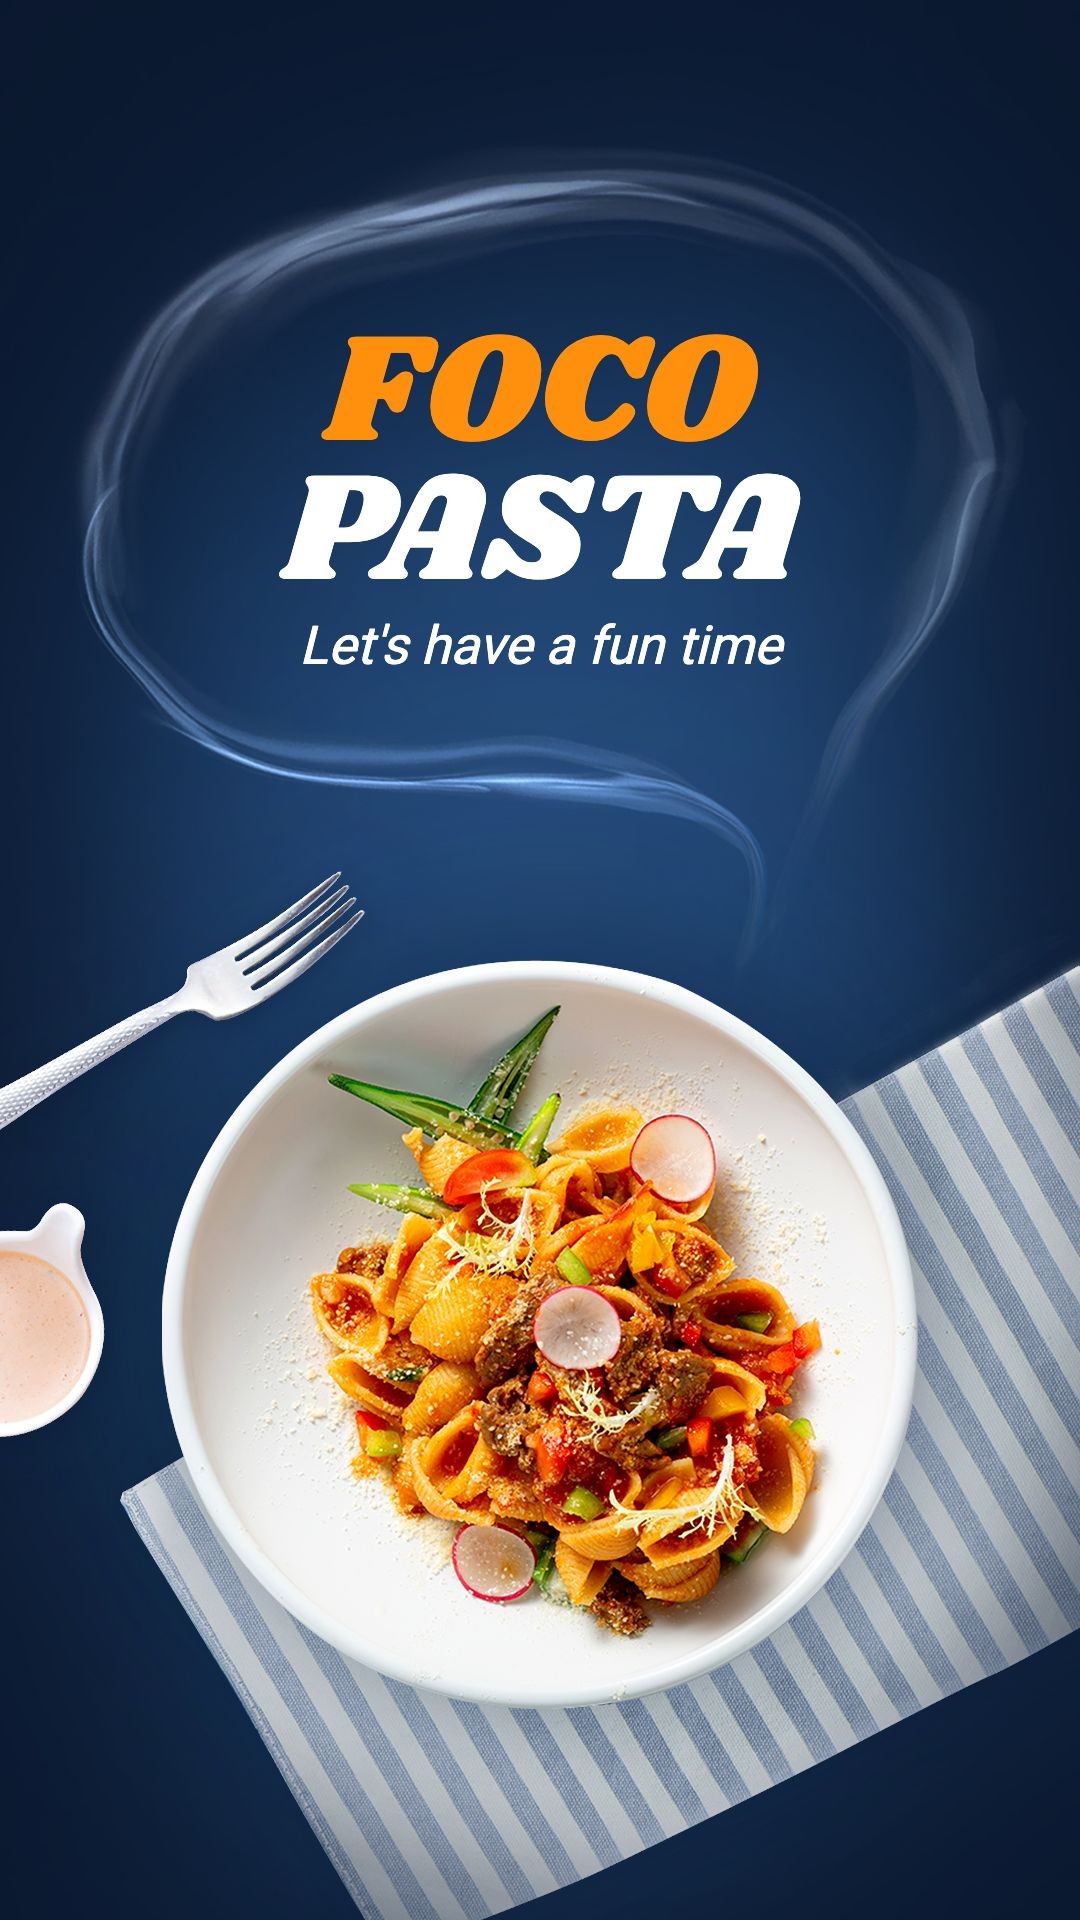 Pasta Groceries Fast Food Ecommerce Story预览效果